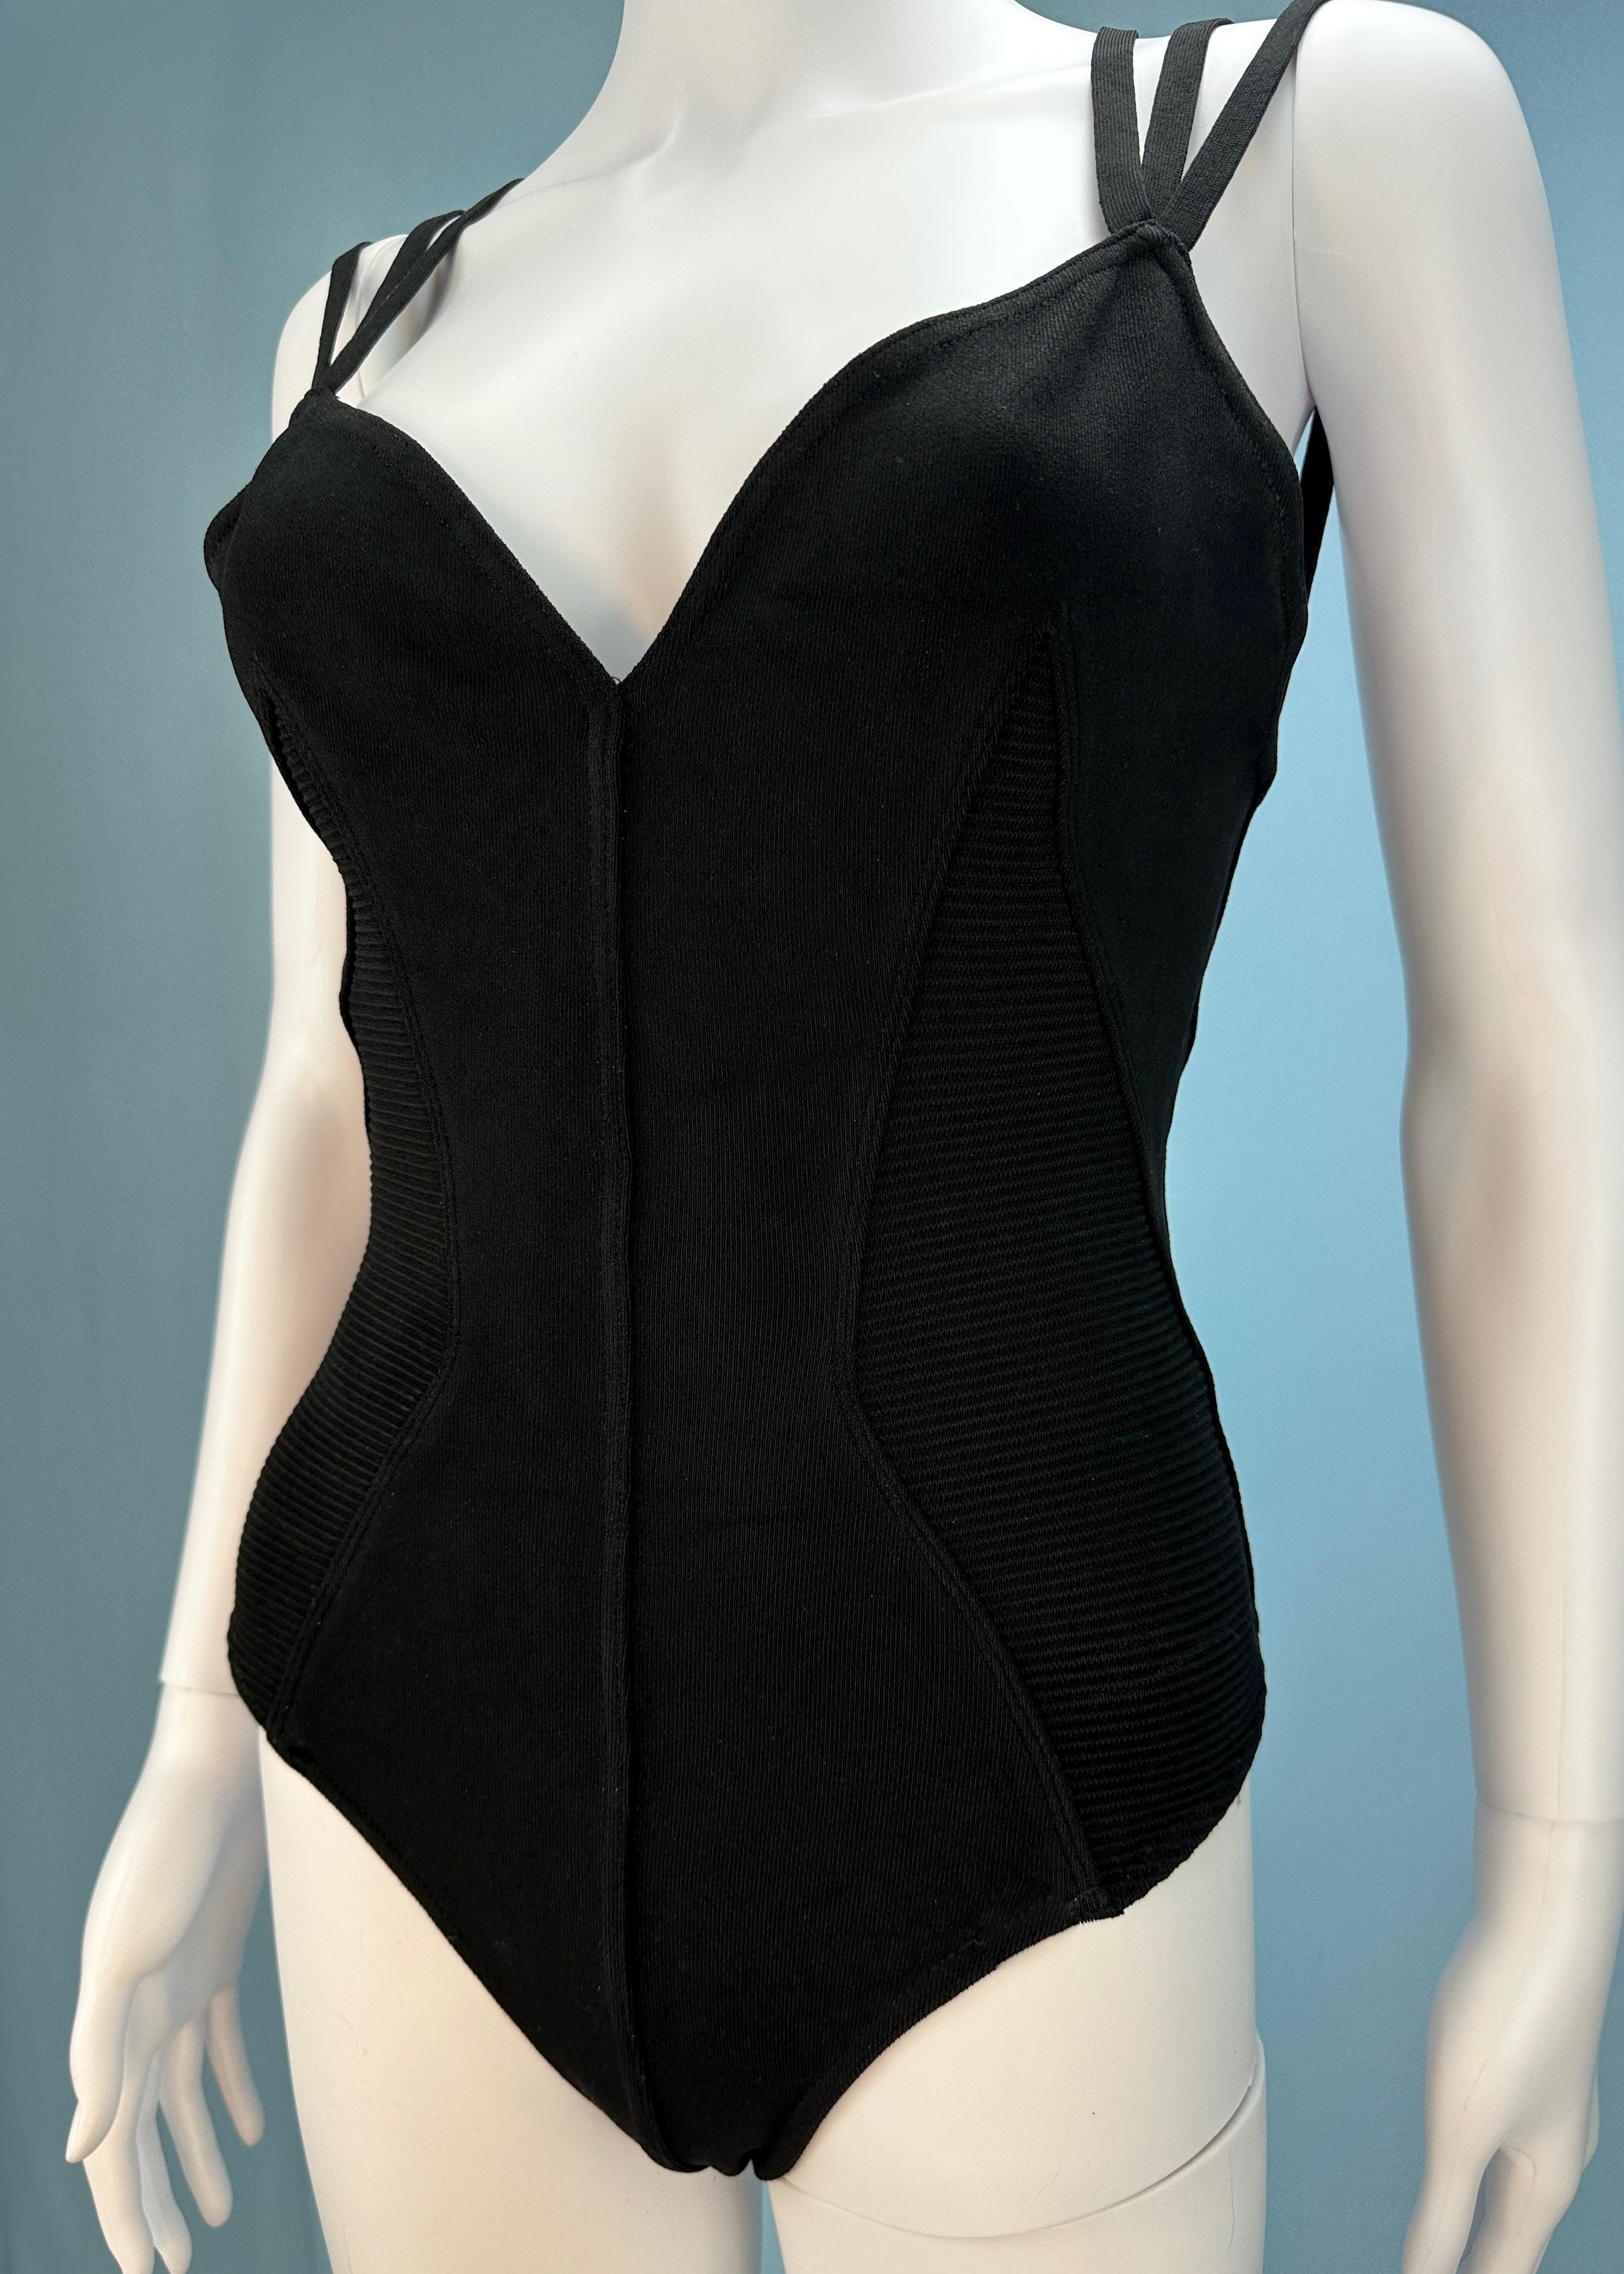 Vintage Azzedine Alaïa

Spring 1990 - dress version seen on the runway 

Black bodysuit with triple strap detail

Ribbed texture on sides 

Popper clasp

Stretch fabric 

Size small - fits approx UK 6 - 10 / US 10 - 14 due to stretch 